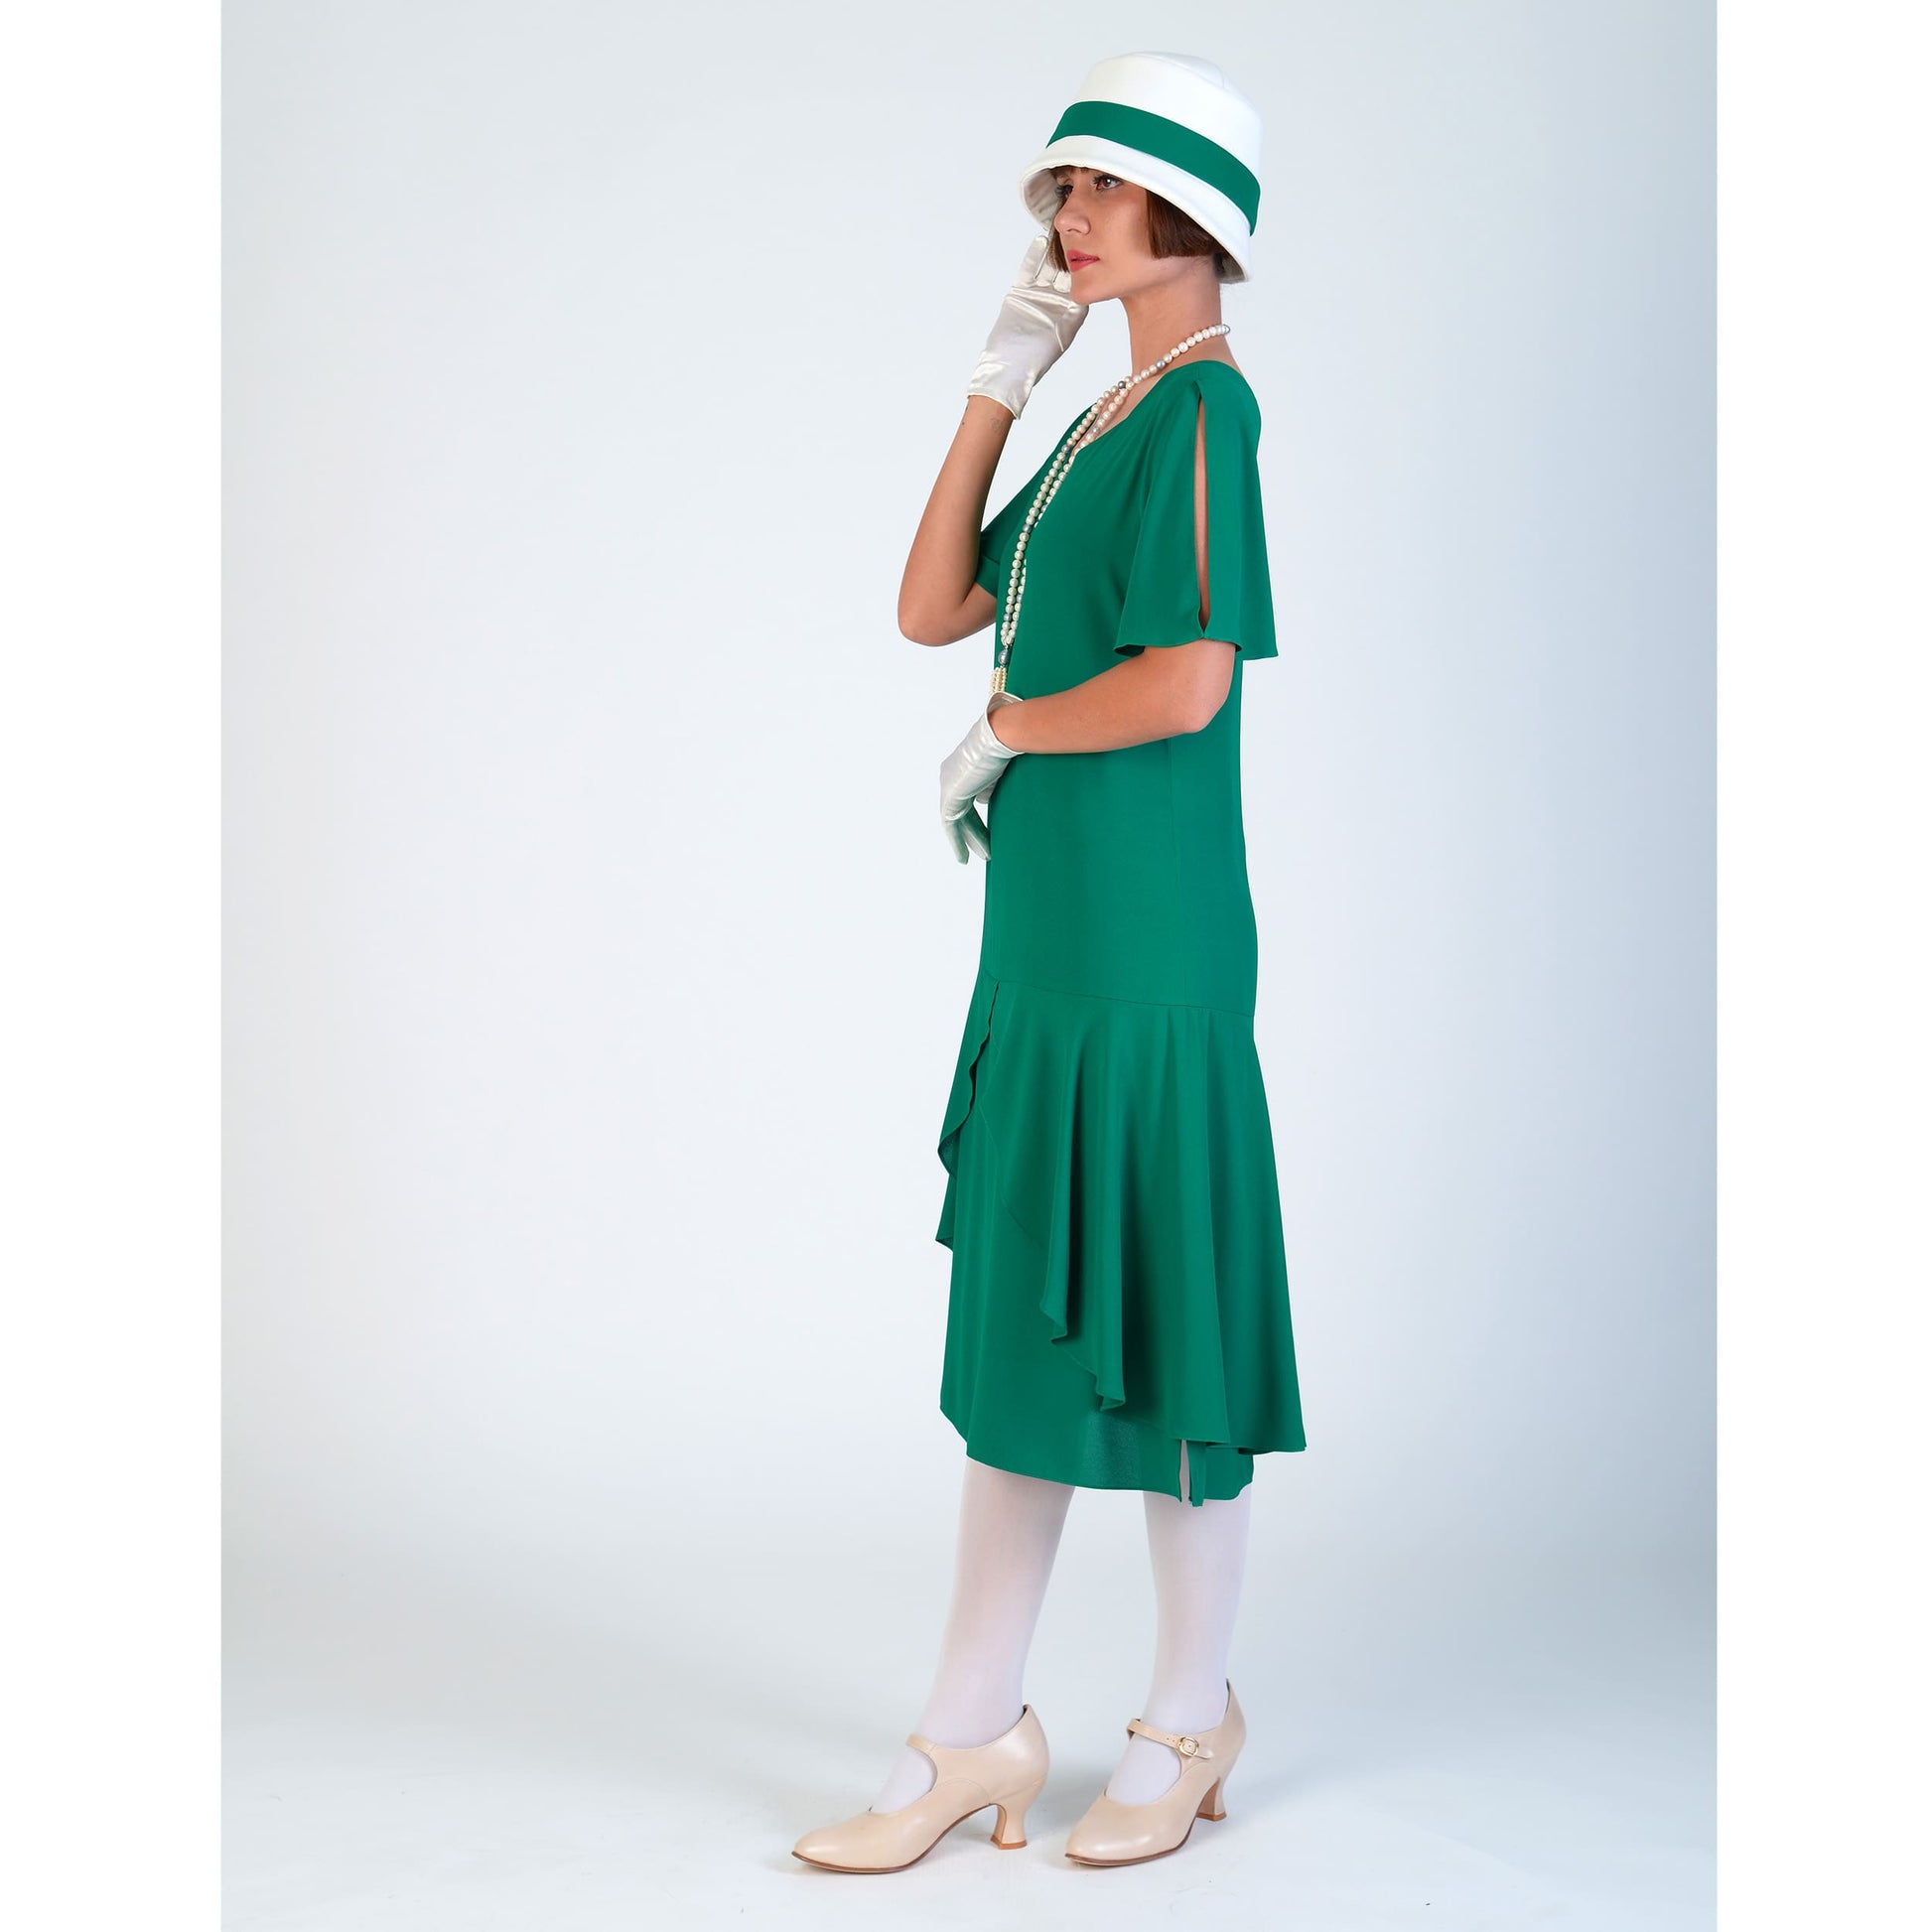 Green 1920s dress with sweetheart neckline. The flapper dress can be worn as a Downton Abbey dress,  Lady Mary dress or Charleston dress.